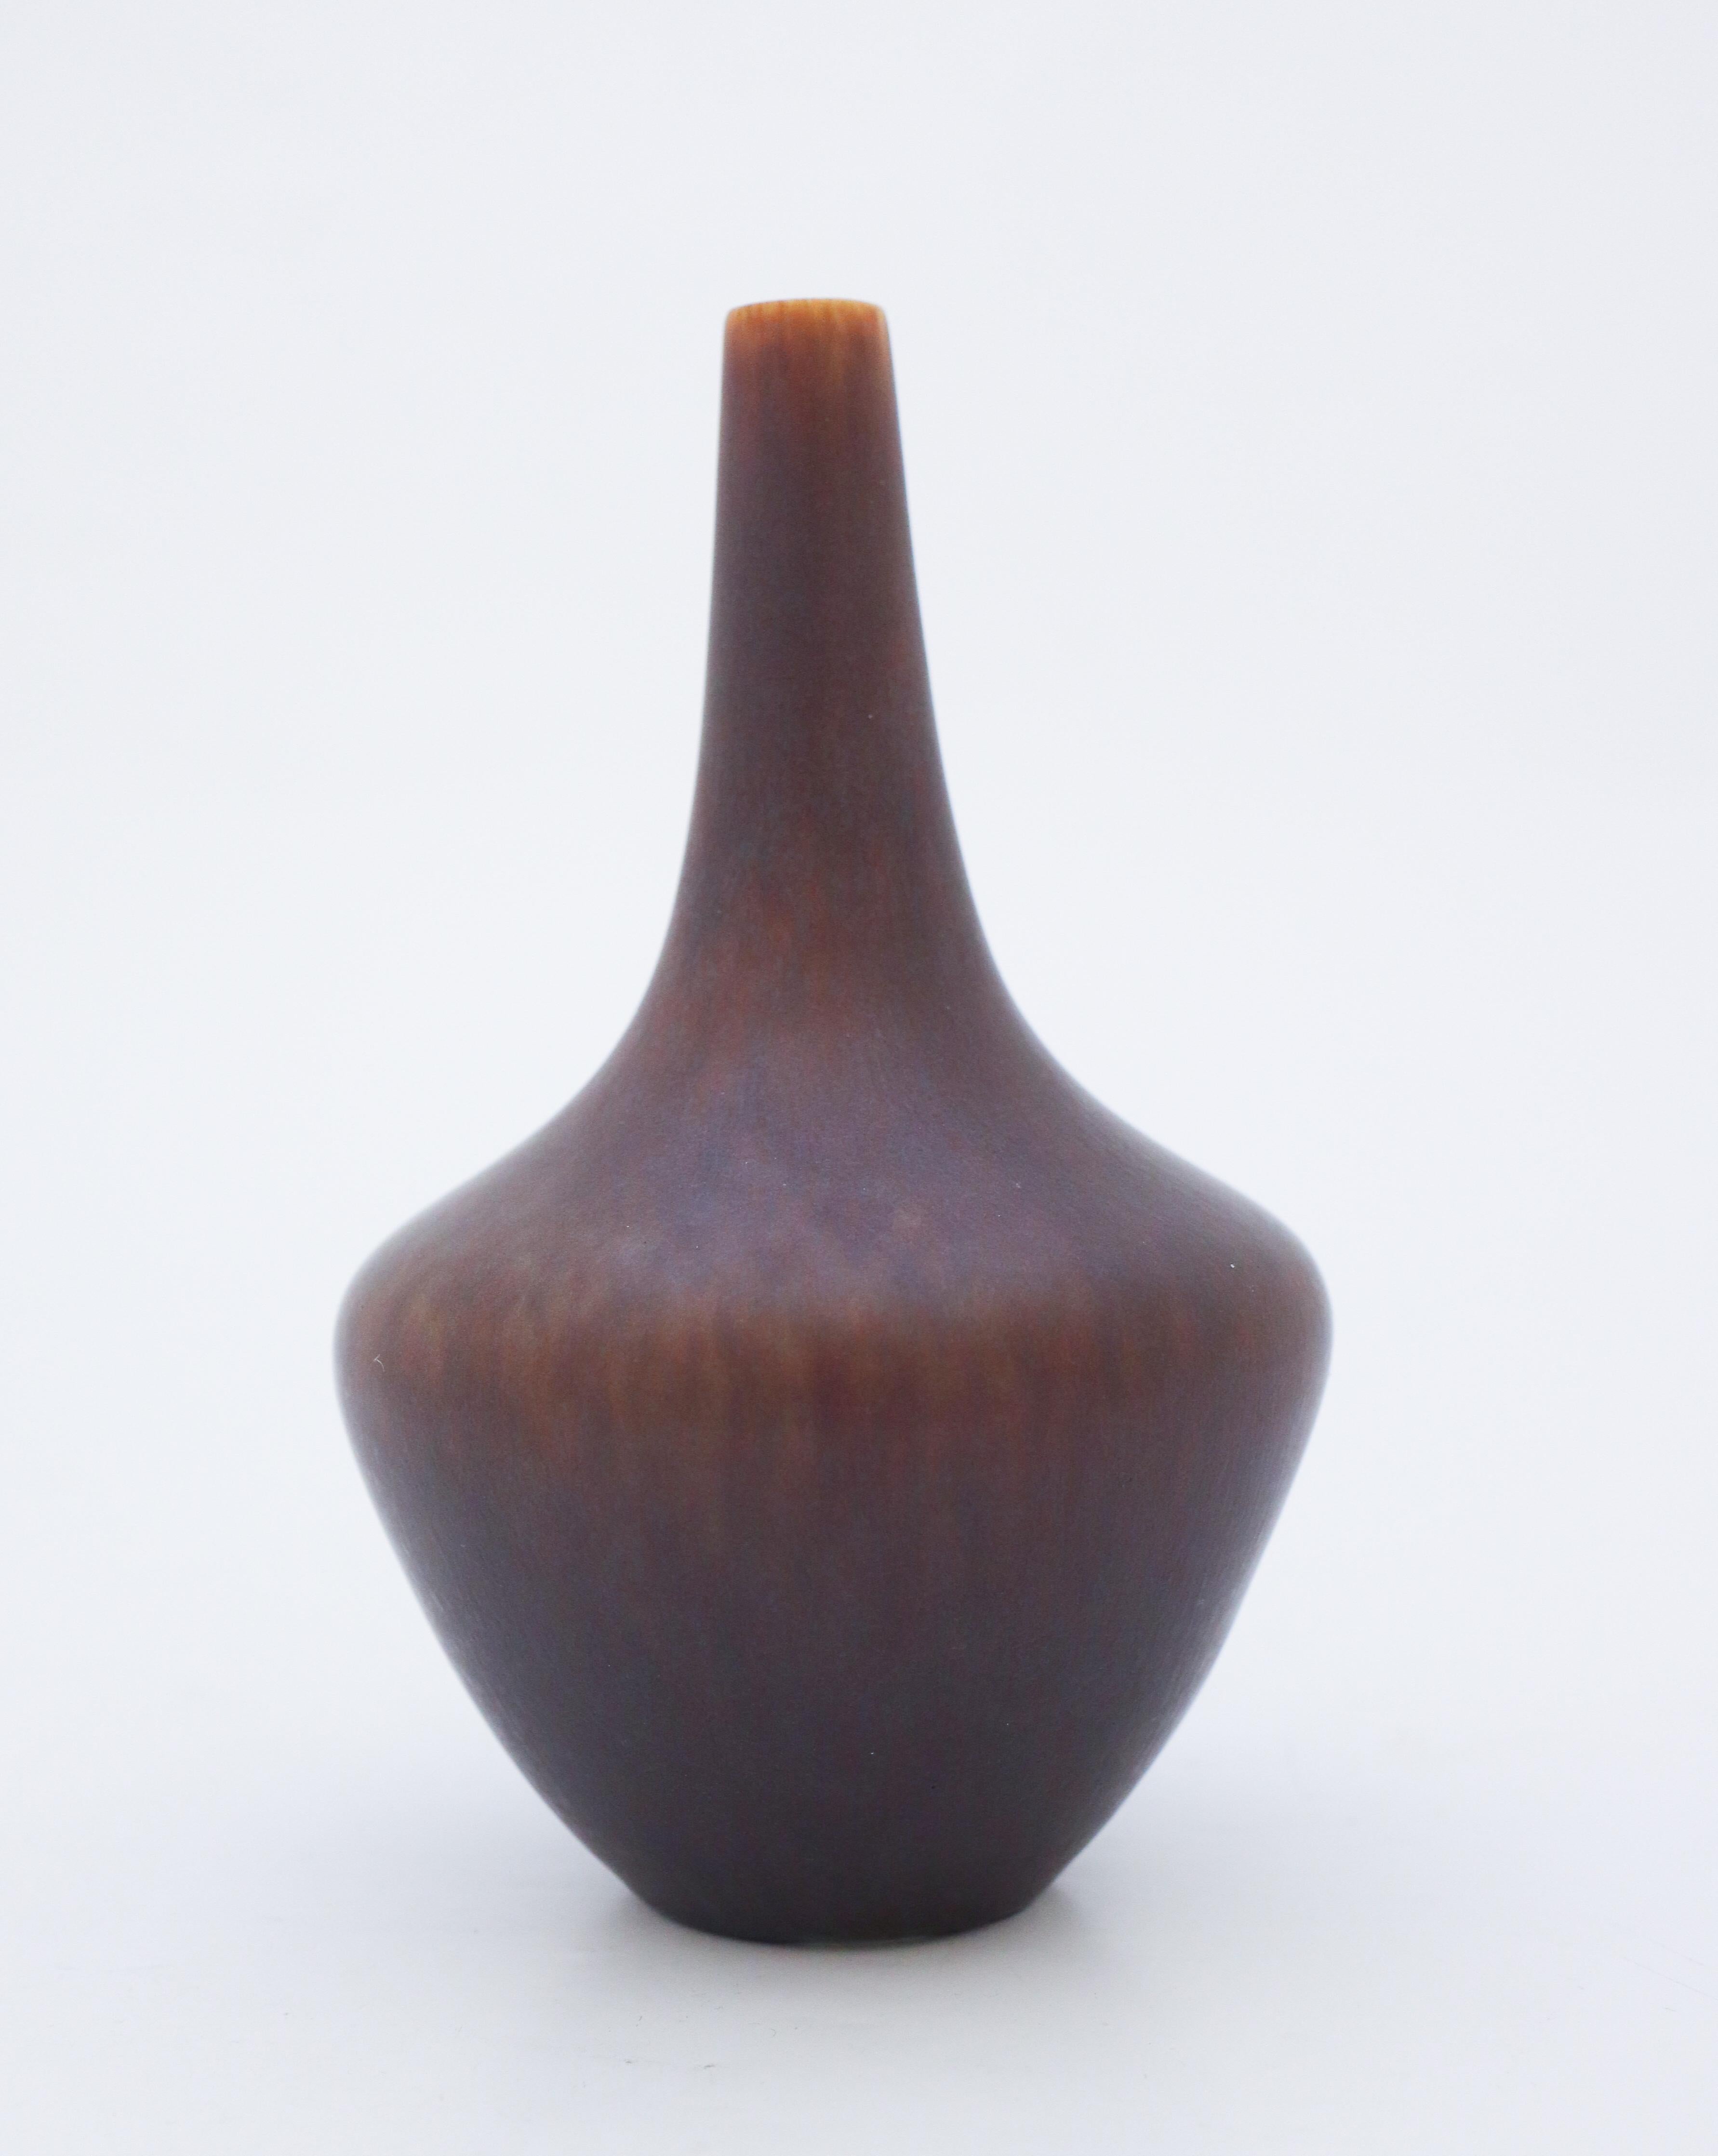 A vase designed by Gunnar Nylund at Rörstrand, it´s 17 cm (6,8) high. It´s in mint condition and marked as 1:st quality. 

Gunnar Nylund was born in Paris 1904 with parents who worked as sculptors and designer so he really soon started hos own